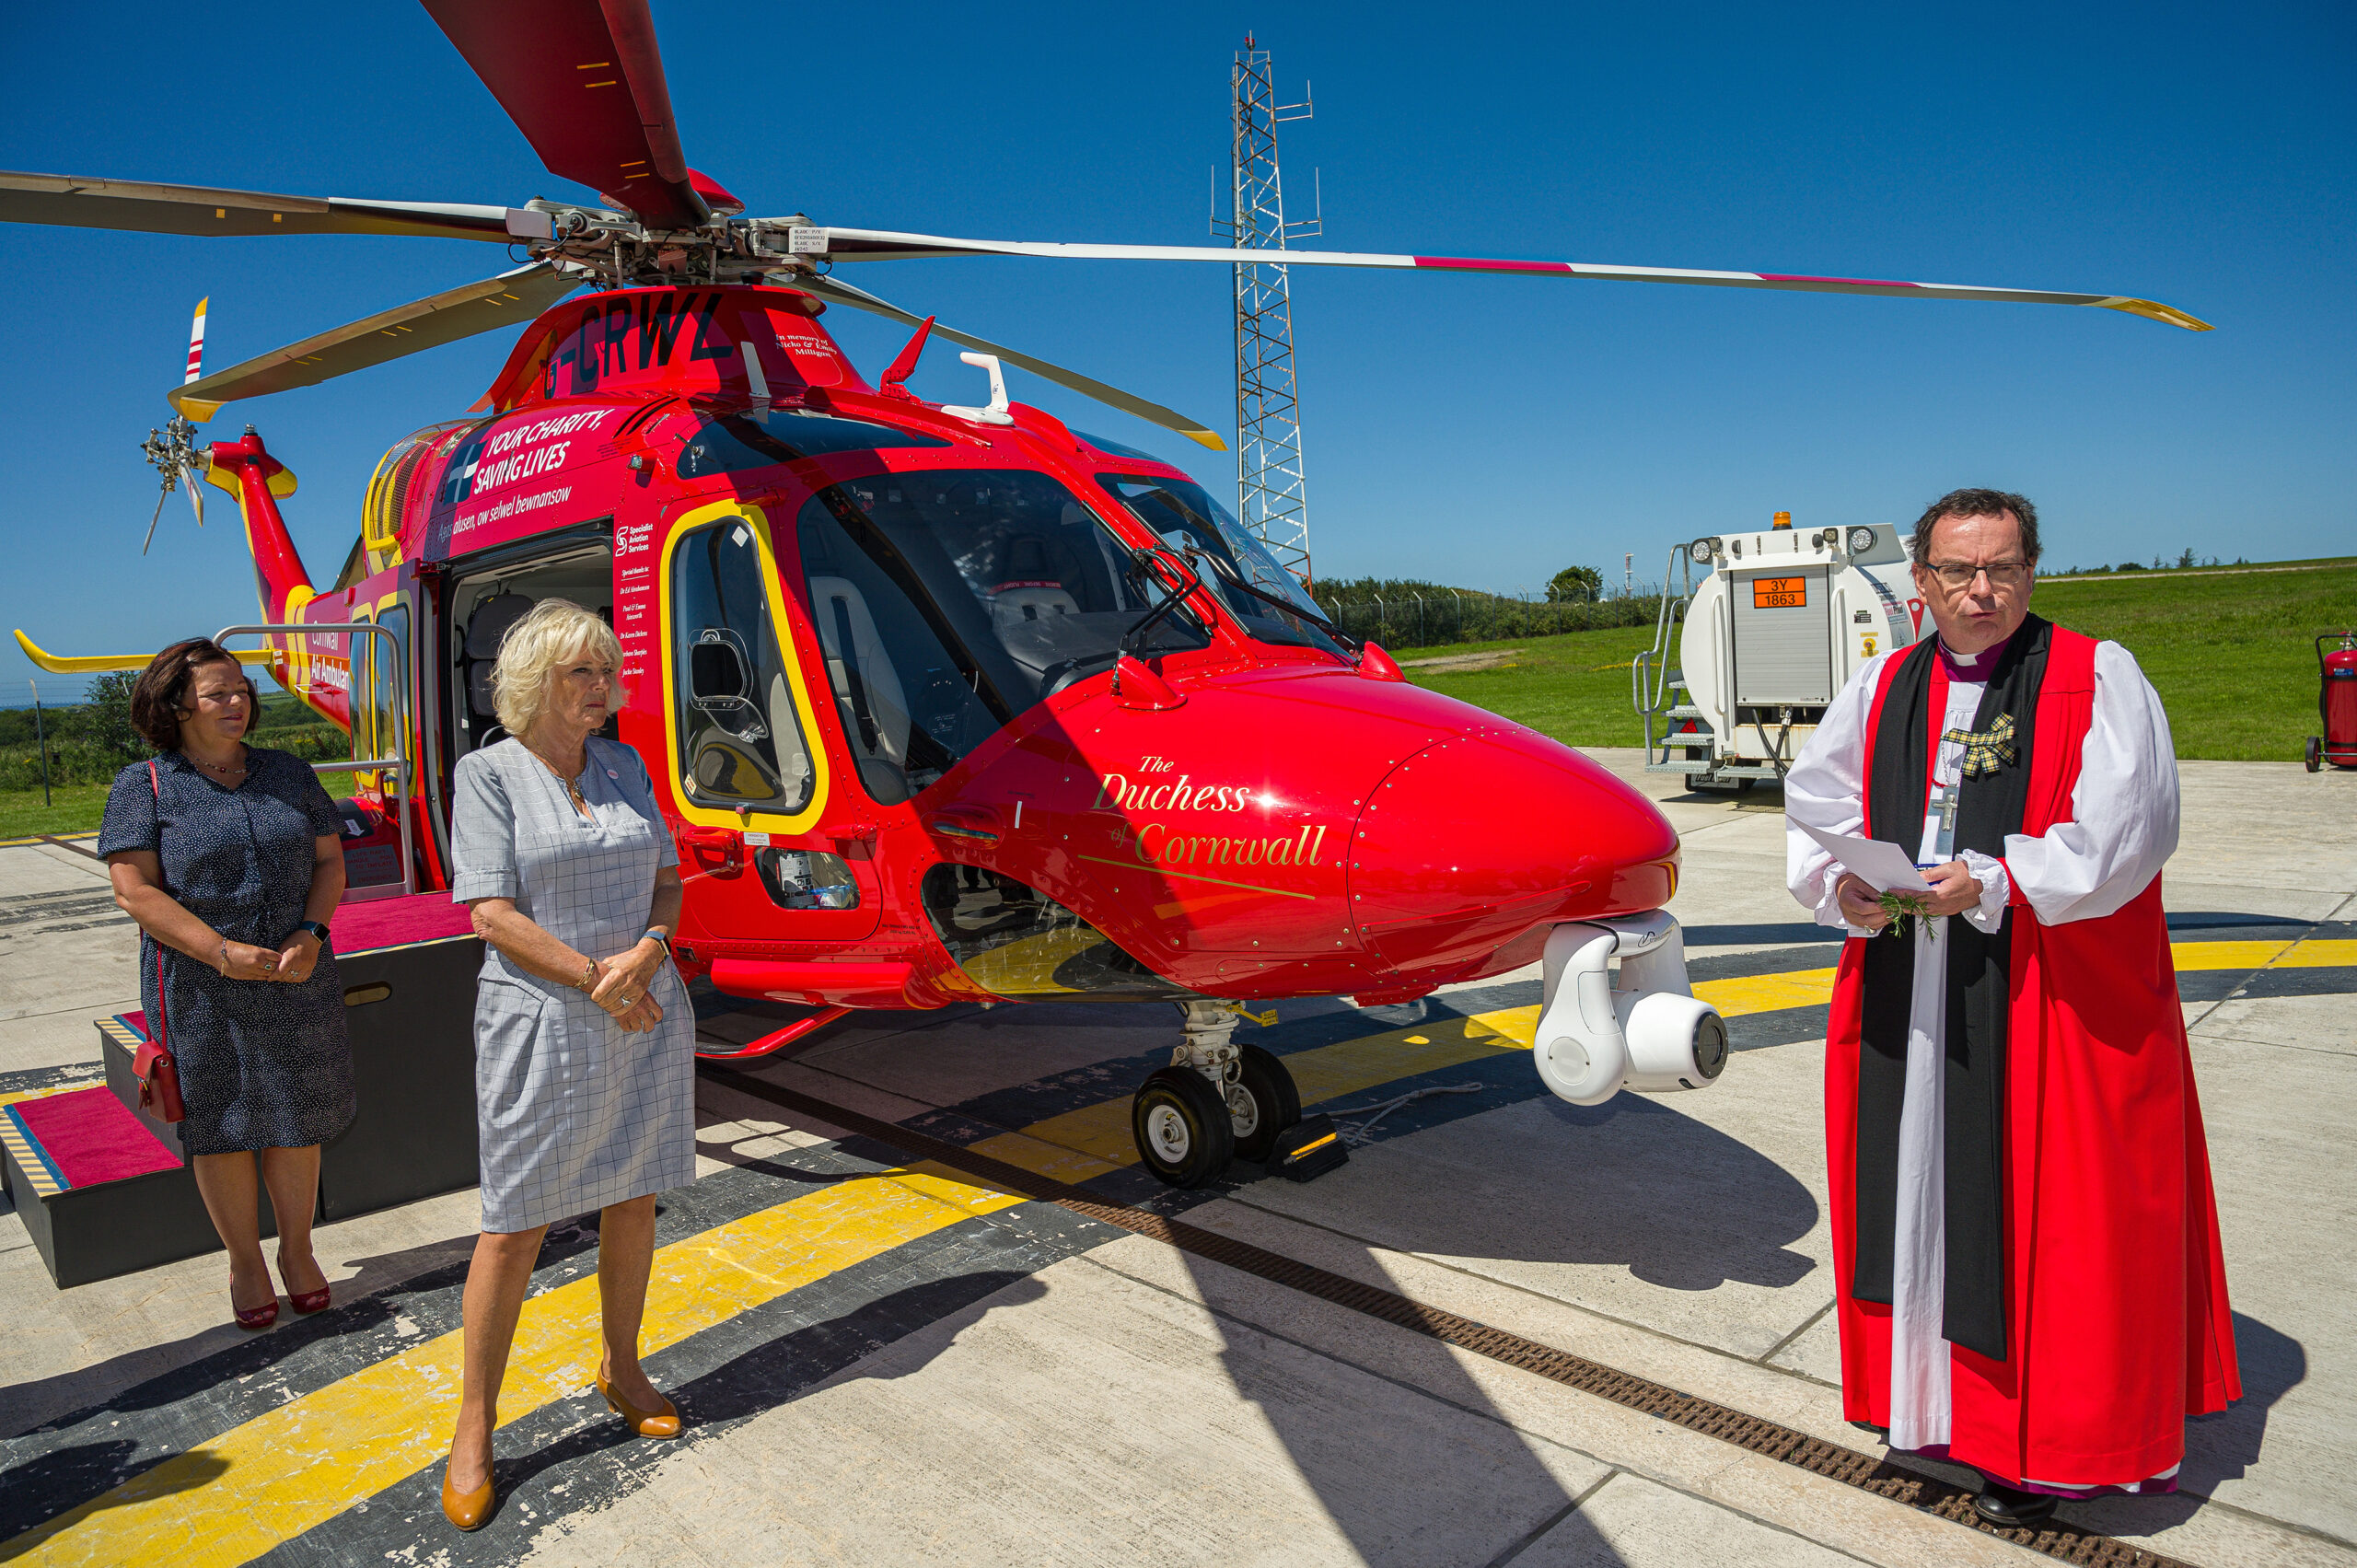 The Bishop of Truro blesses the new helicopter scaled